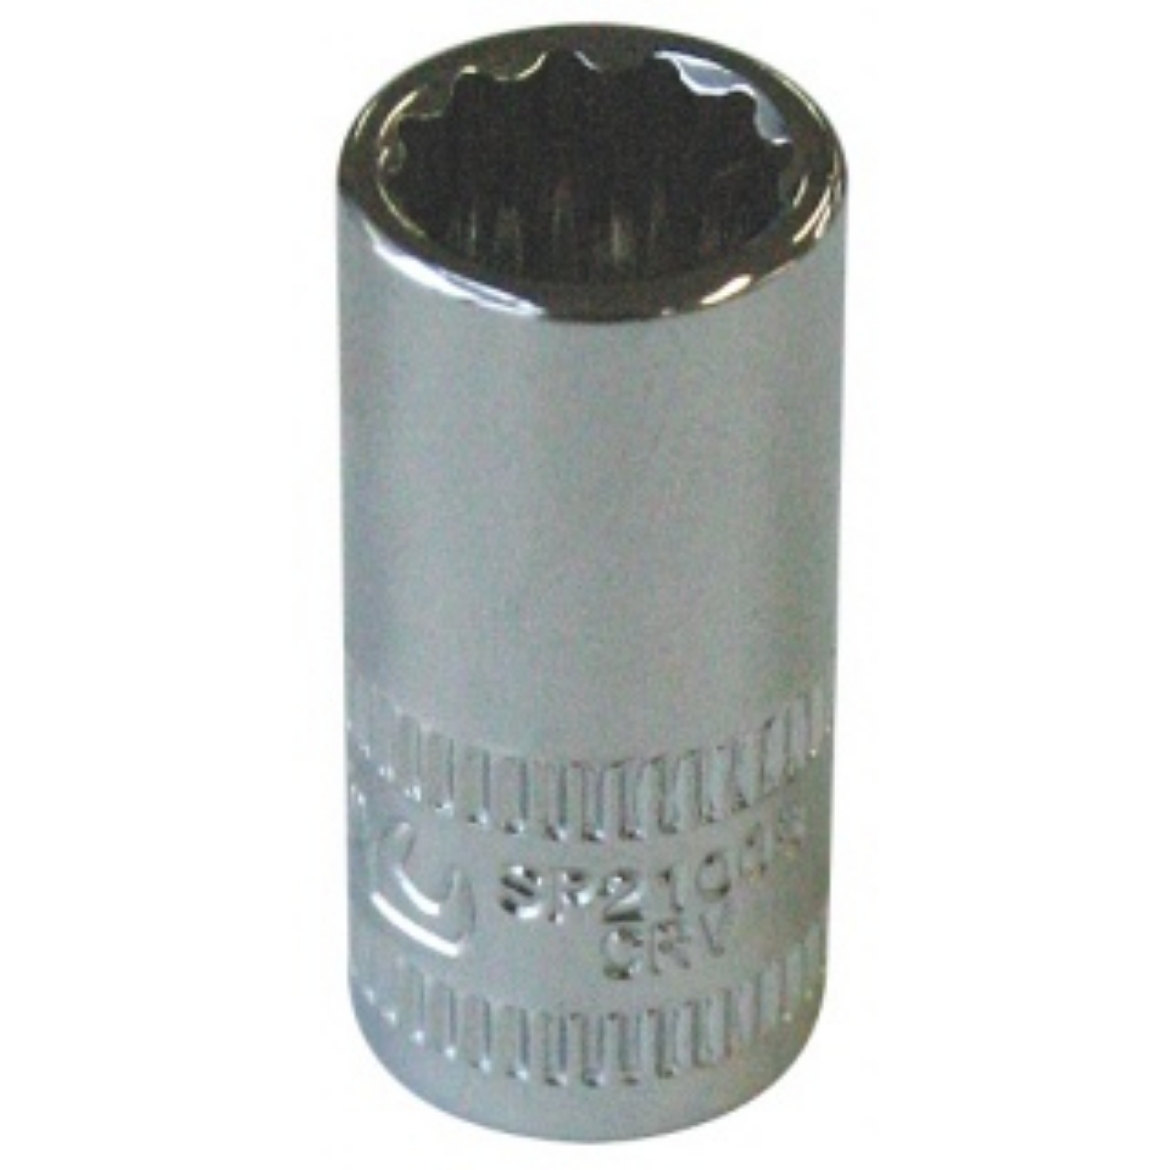 Picture of SOCKET 1/4"DR 12 PT METRIC 7MM